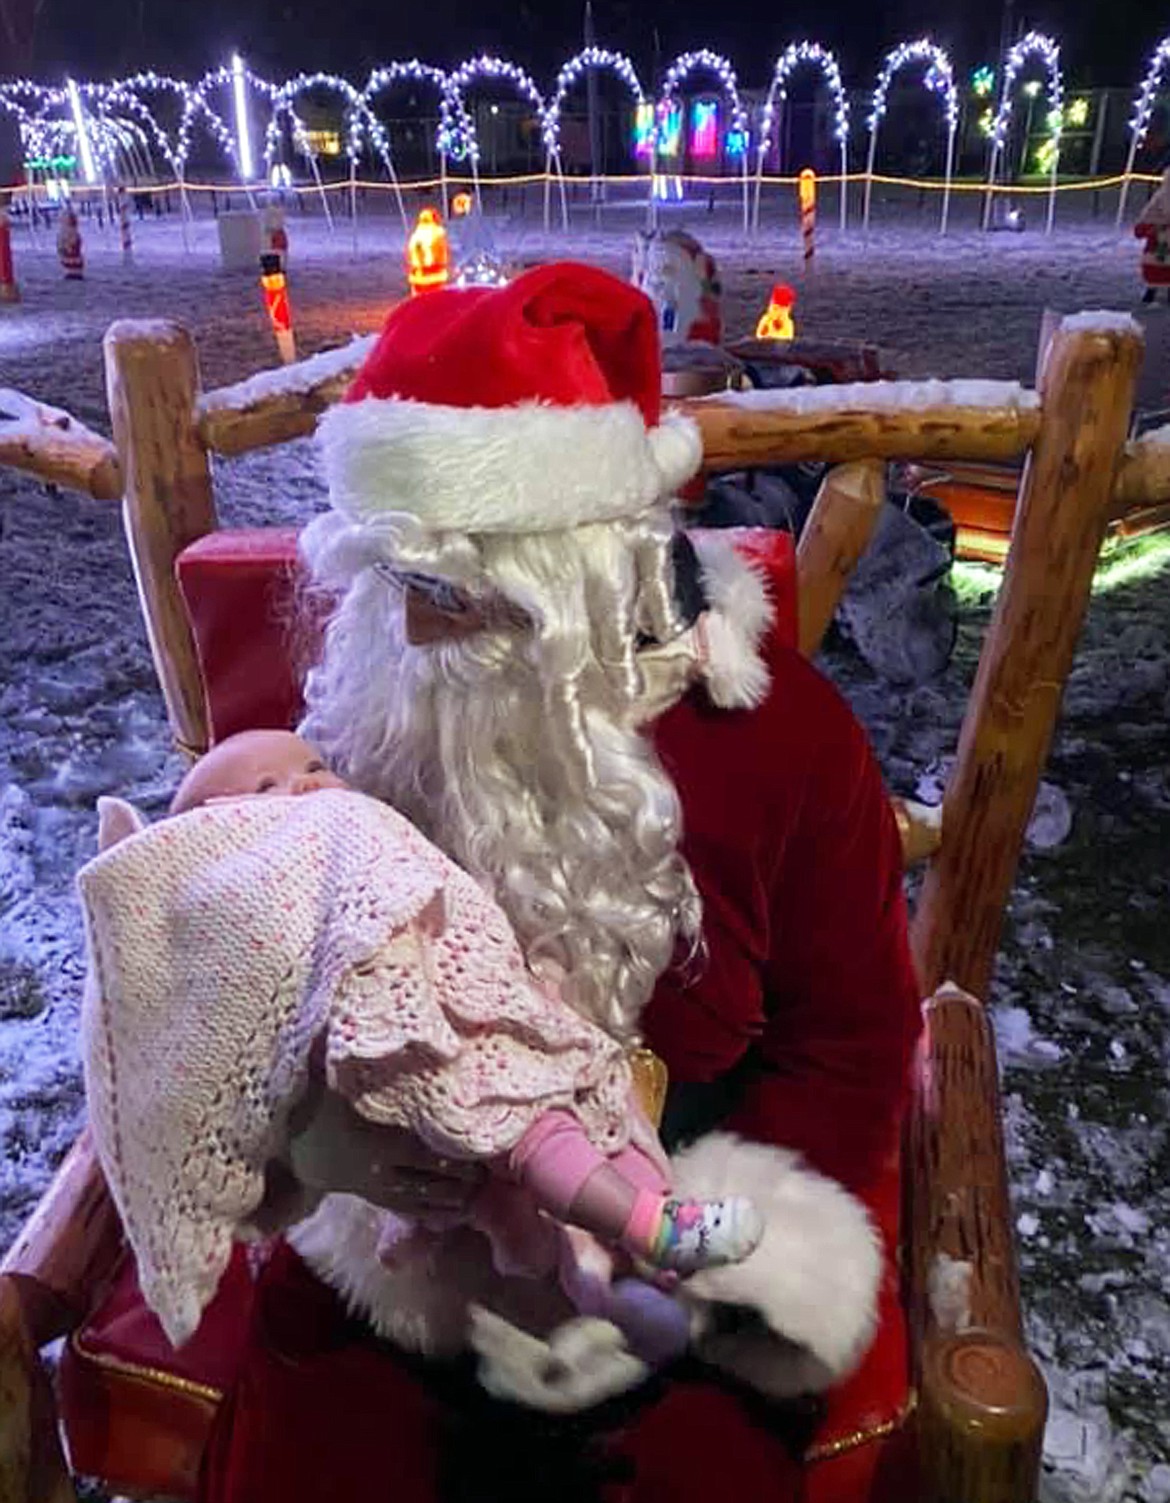 Santa Claus holds an infant at the holiday light show at Suntree RV Park.